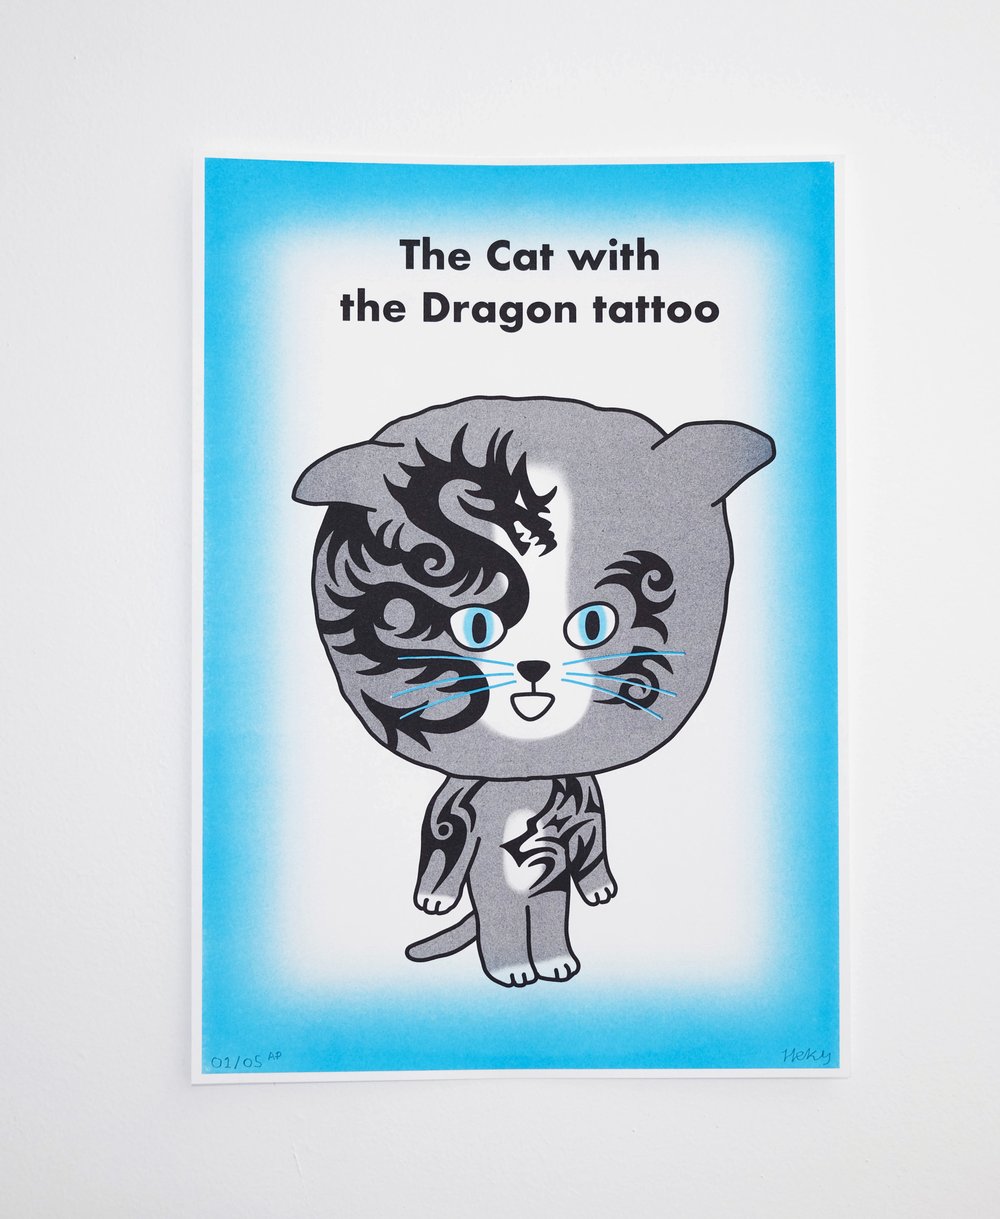 The cat with the dragon tattoo